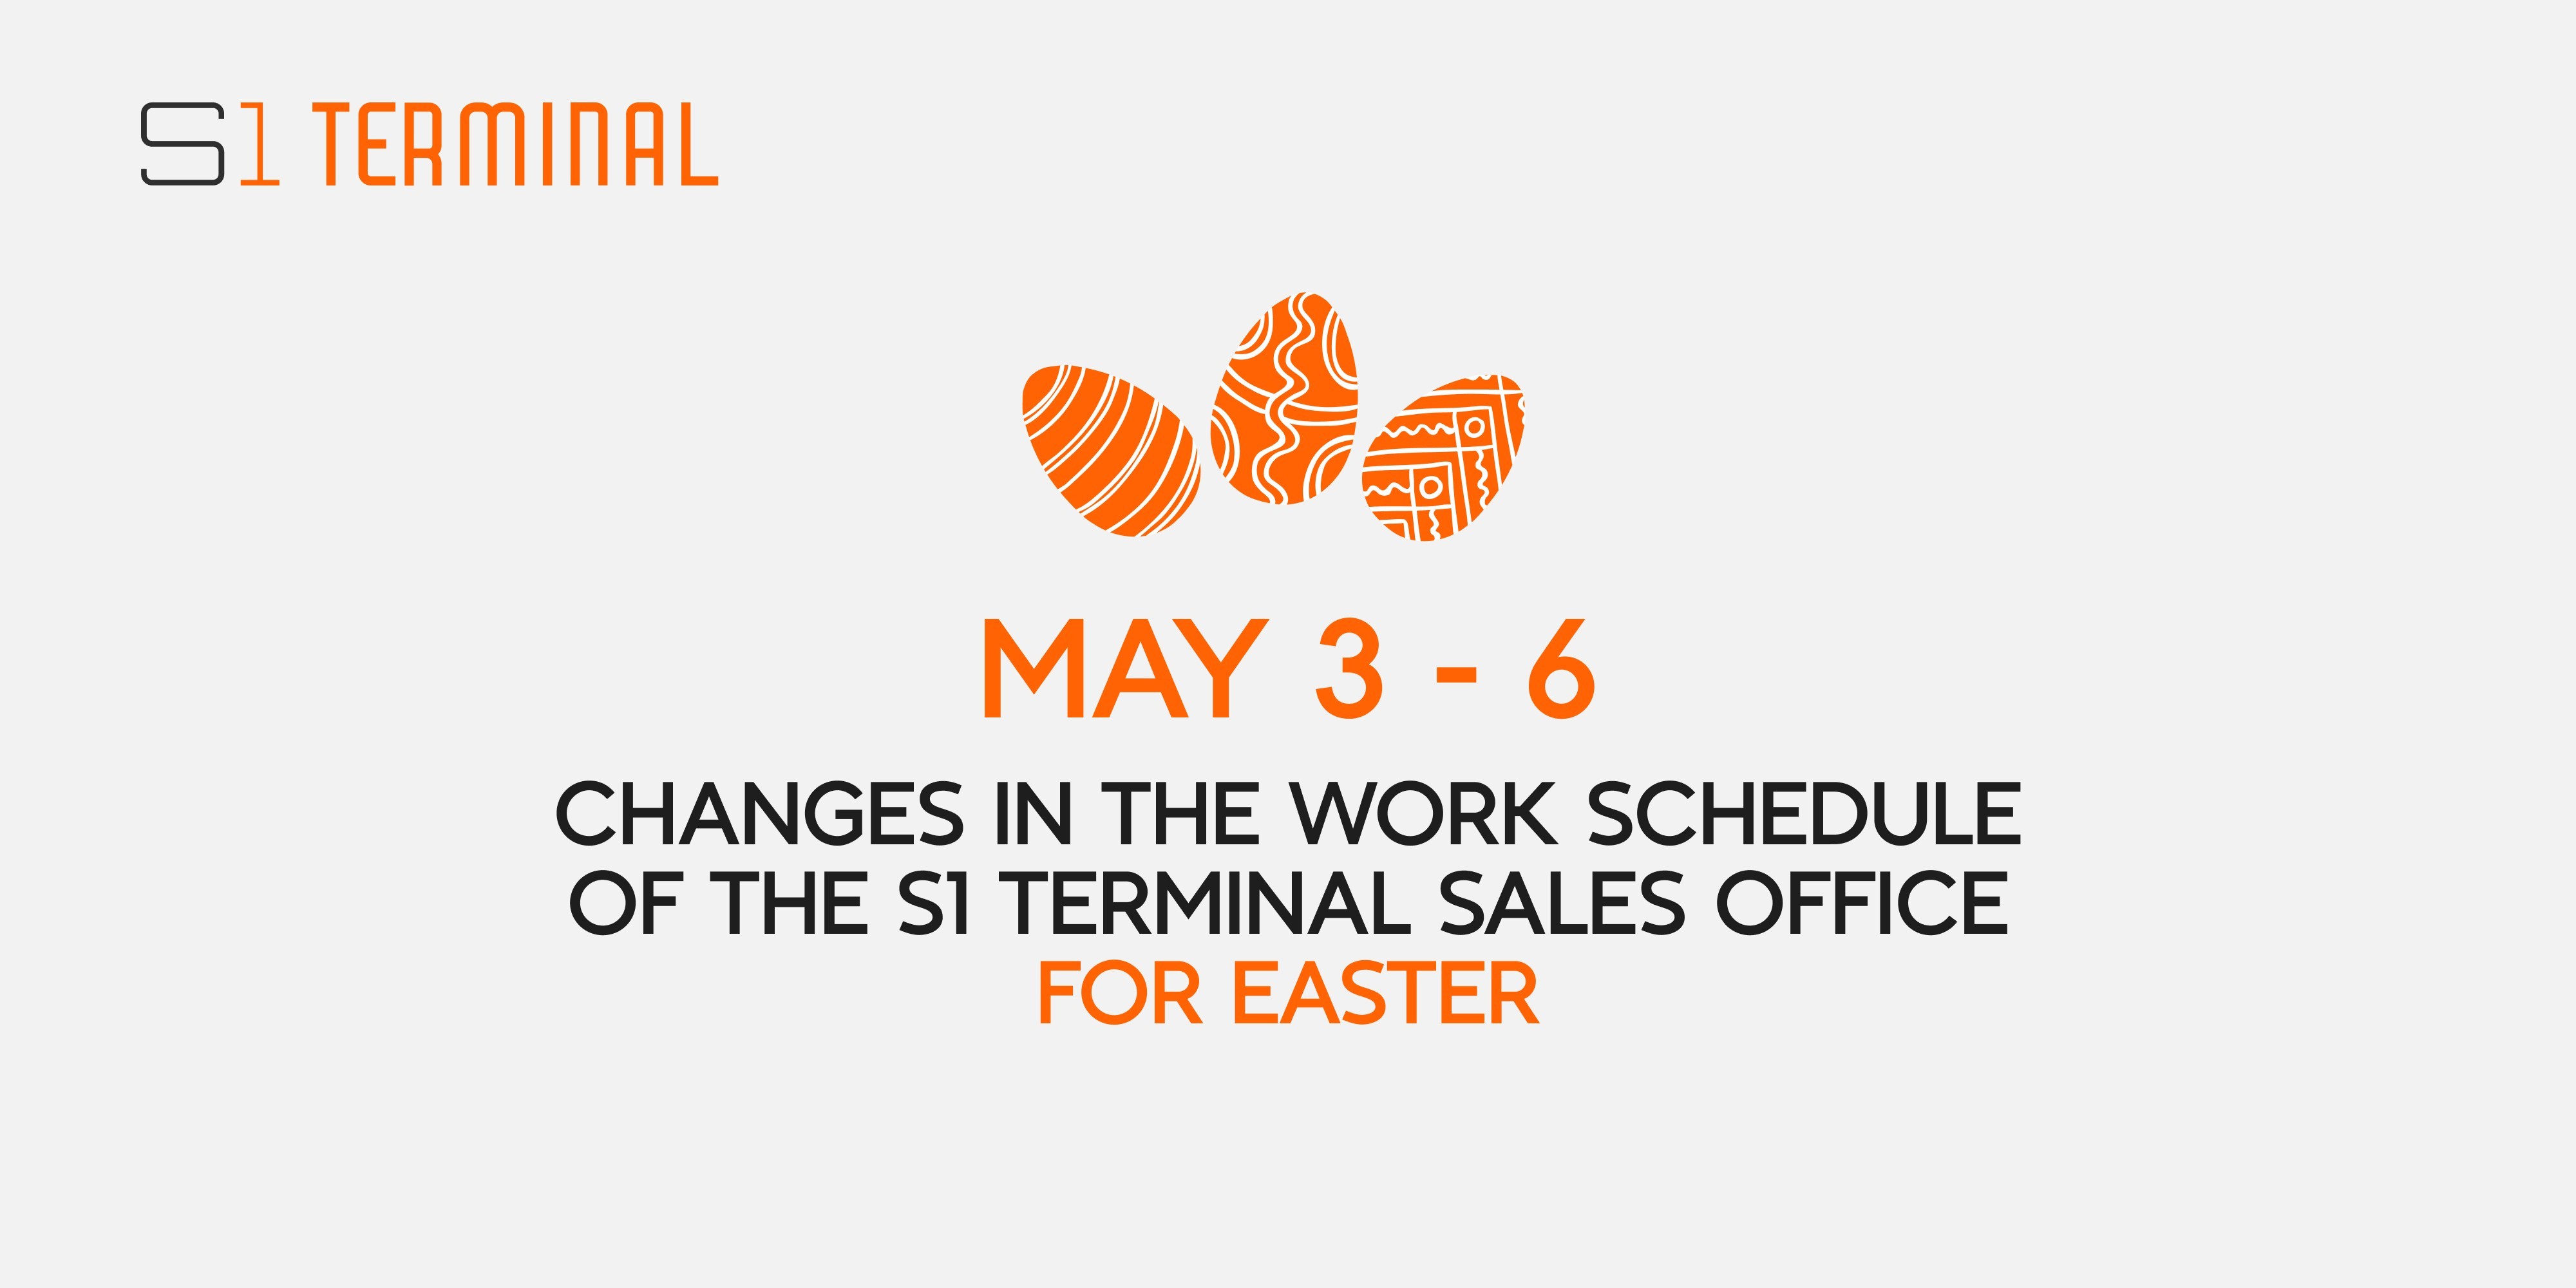 May 3 - 6: changes in the work schedule of the S1 Terminal sales office for Easter 